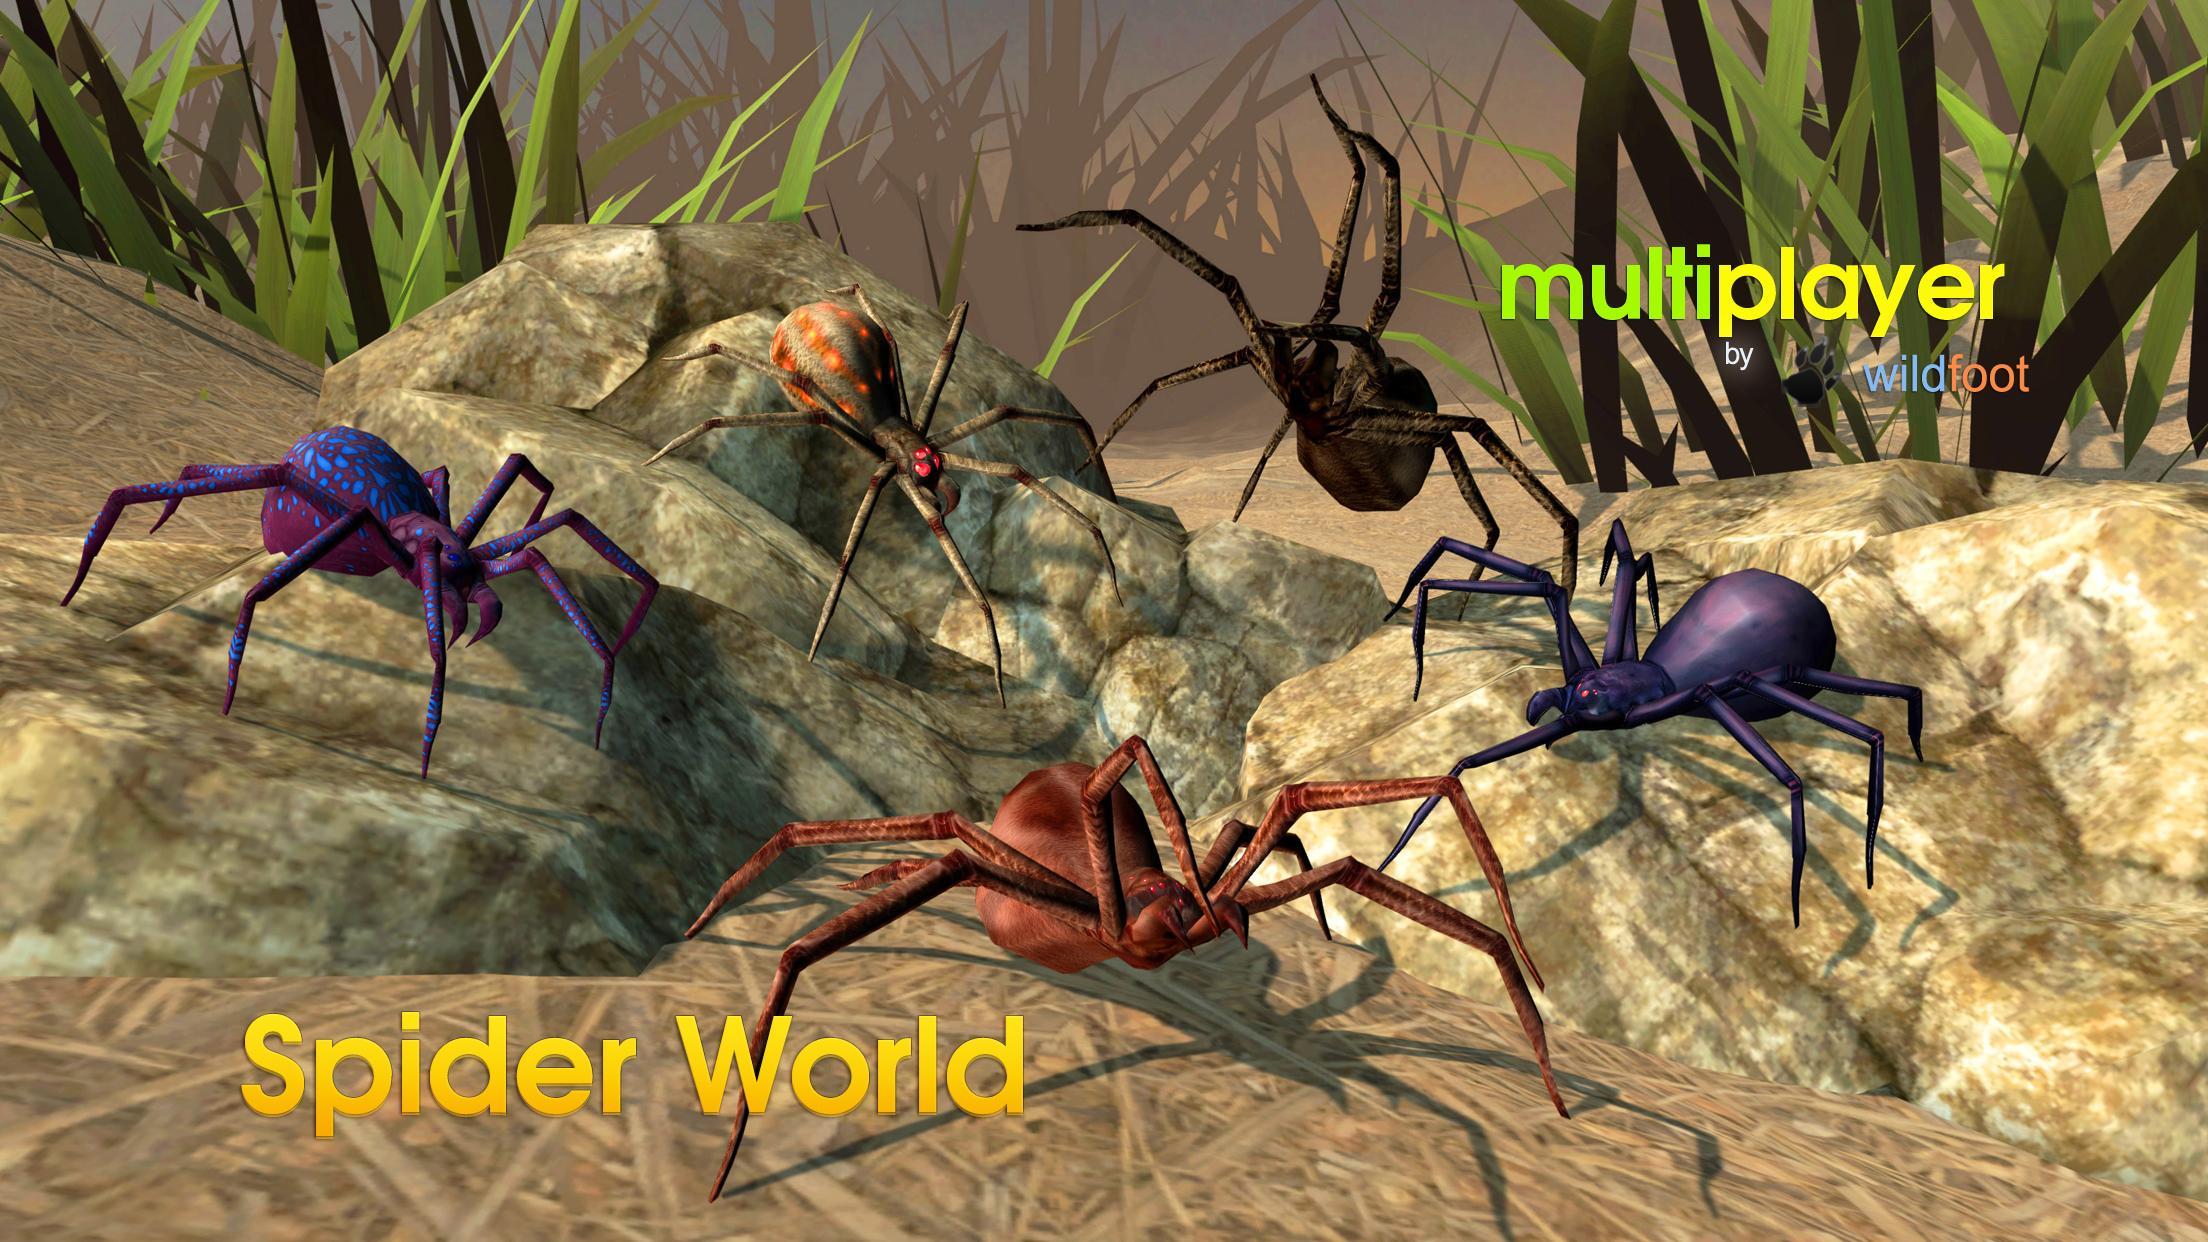 Spider World Multiplayer For Android Apk Download - giant spider roblox horror game